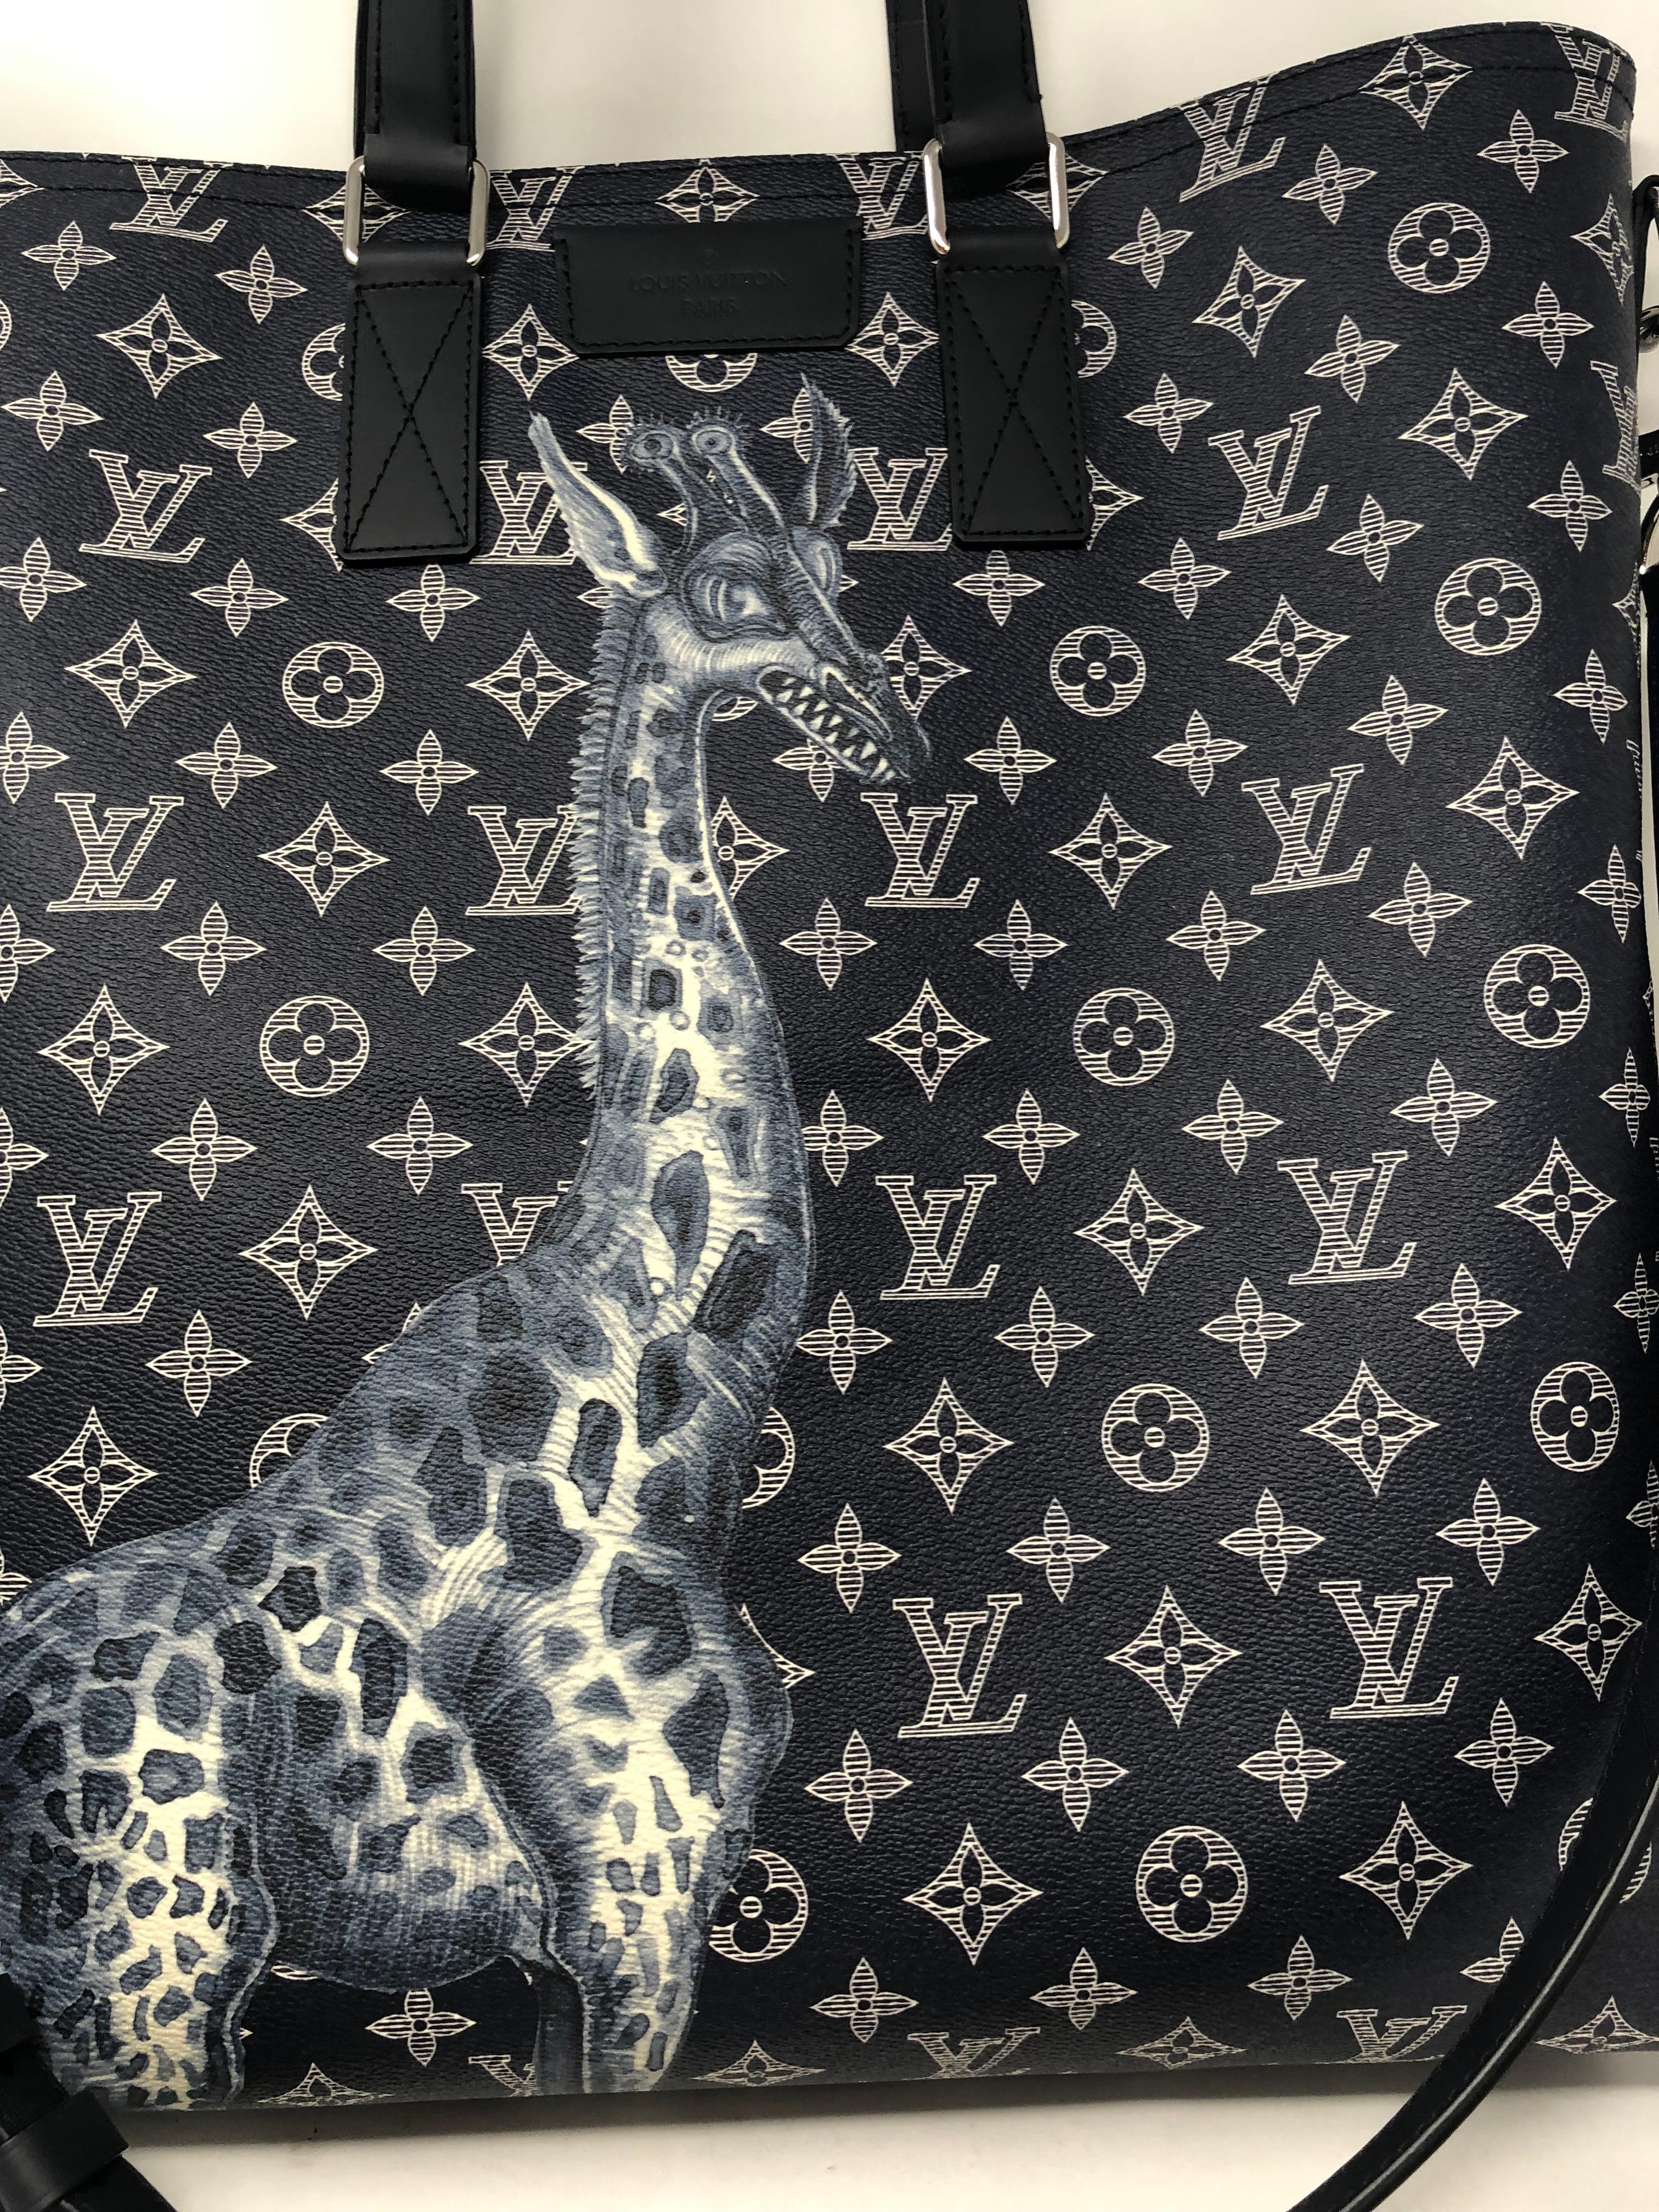 Louis Vuitton Giraffe Tote Bag by Chapman Brothers. Dark Blue indigo coated canvas and leather trim with leather strap. Chapman Brothers collaboration with LV. Rare and limited. Brand new condition. Collector's item. Don't miss out on this one.